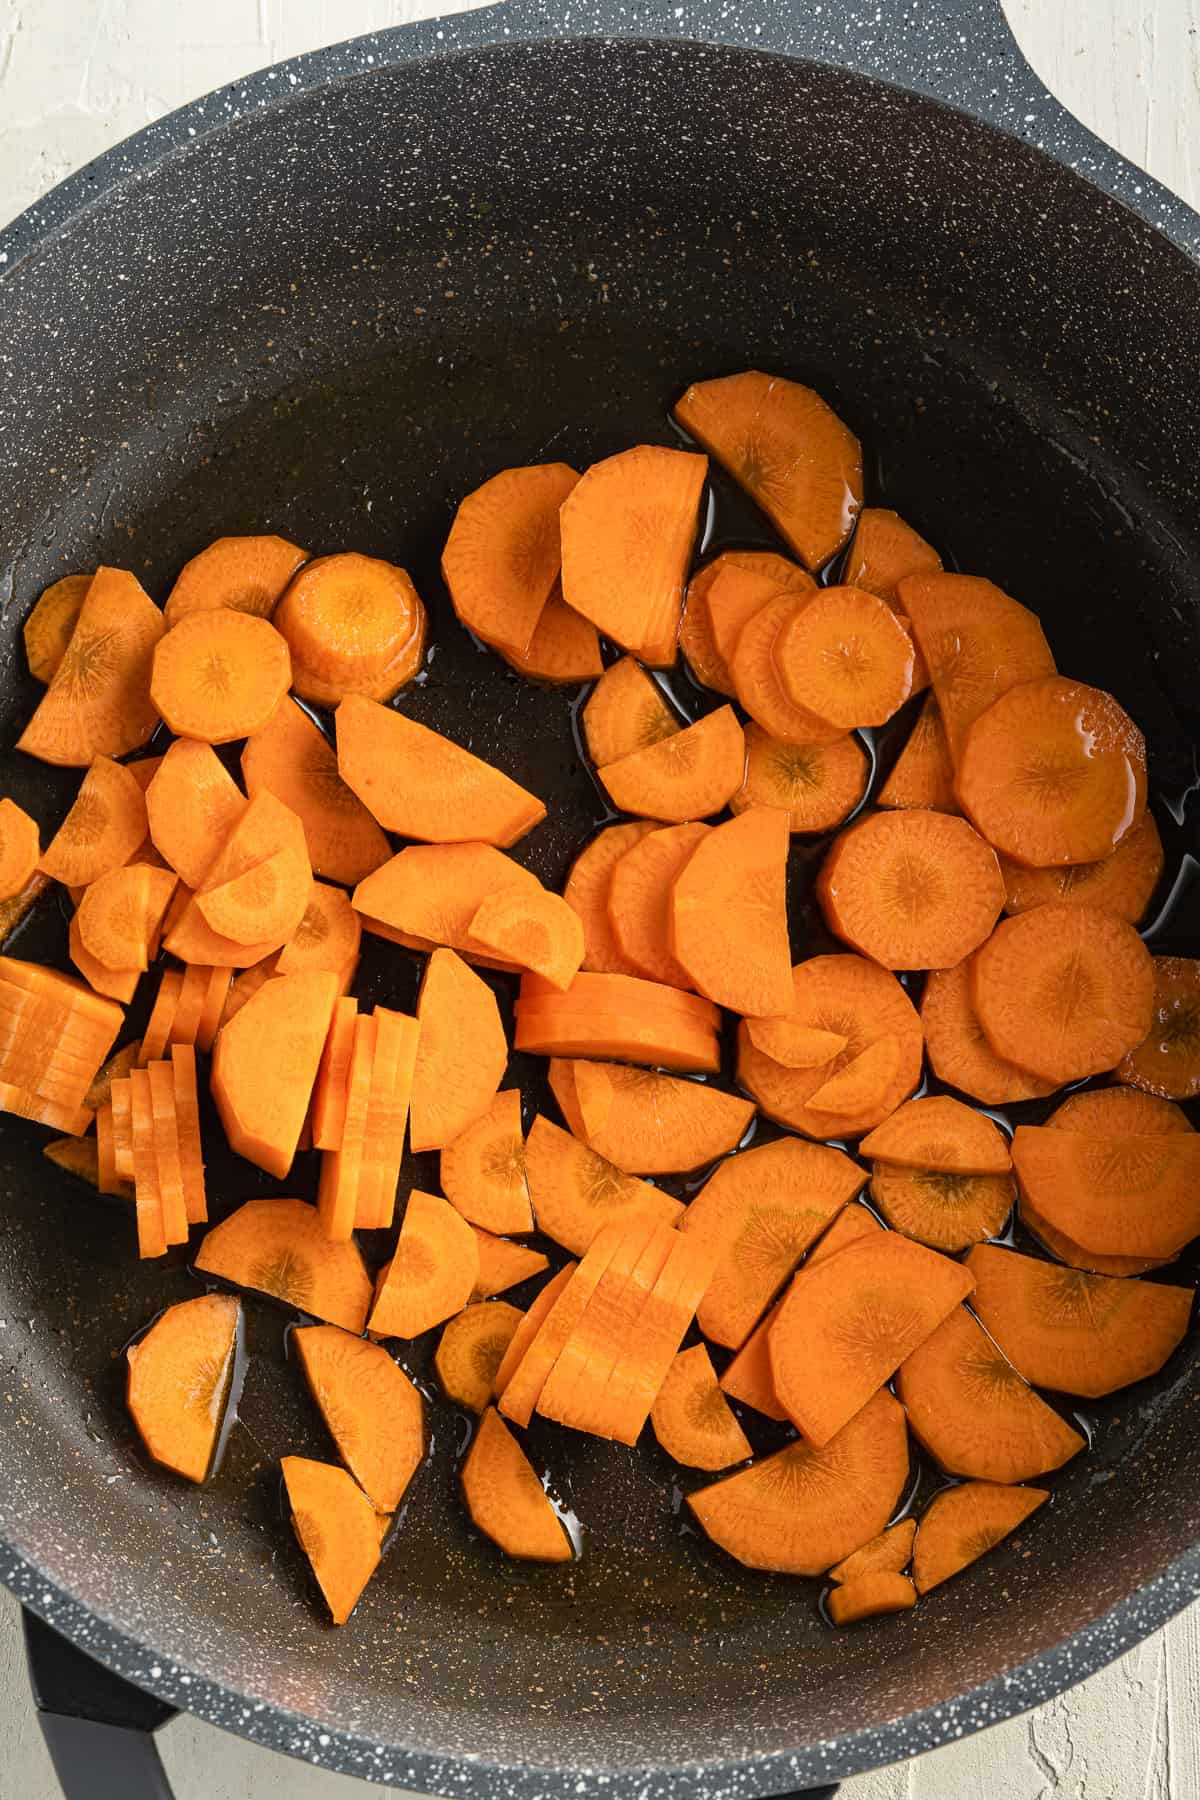 Top view of a black pot with chopped carrots in it.